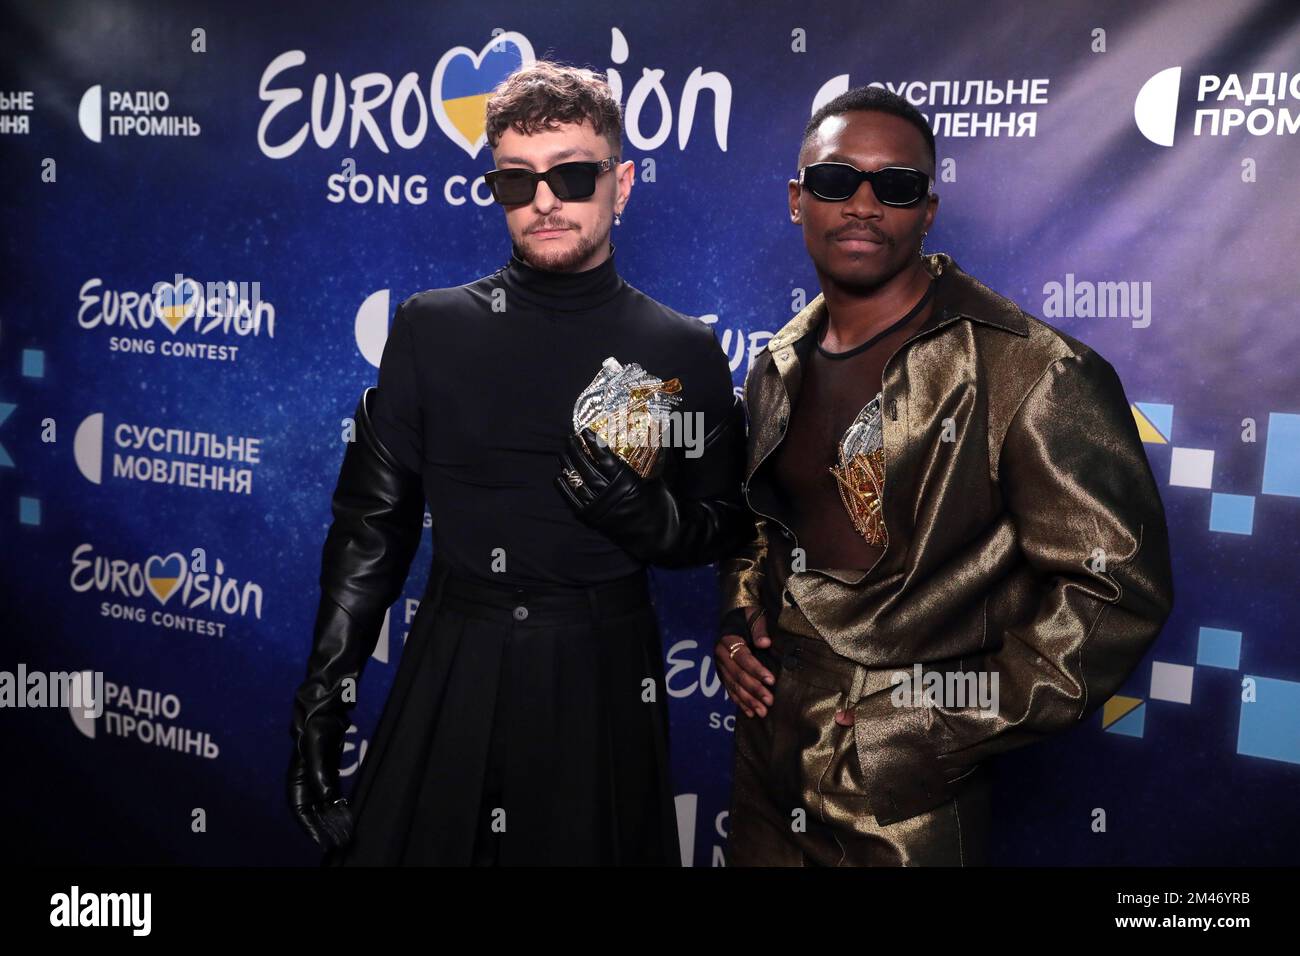 KYIV, UKRAINE - DECEMBER 17, 2022 - Members of the TVORCHI band pose for a photo at the press conference of the winners of the national selection for the International Song Contest Eurovision 2023, Kyiv, capital of Ukraine. Stock Photo